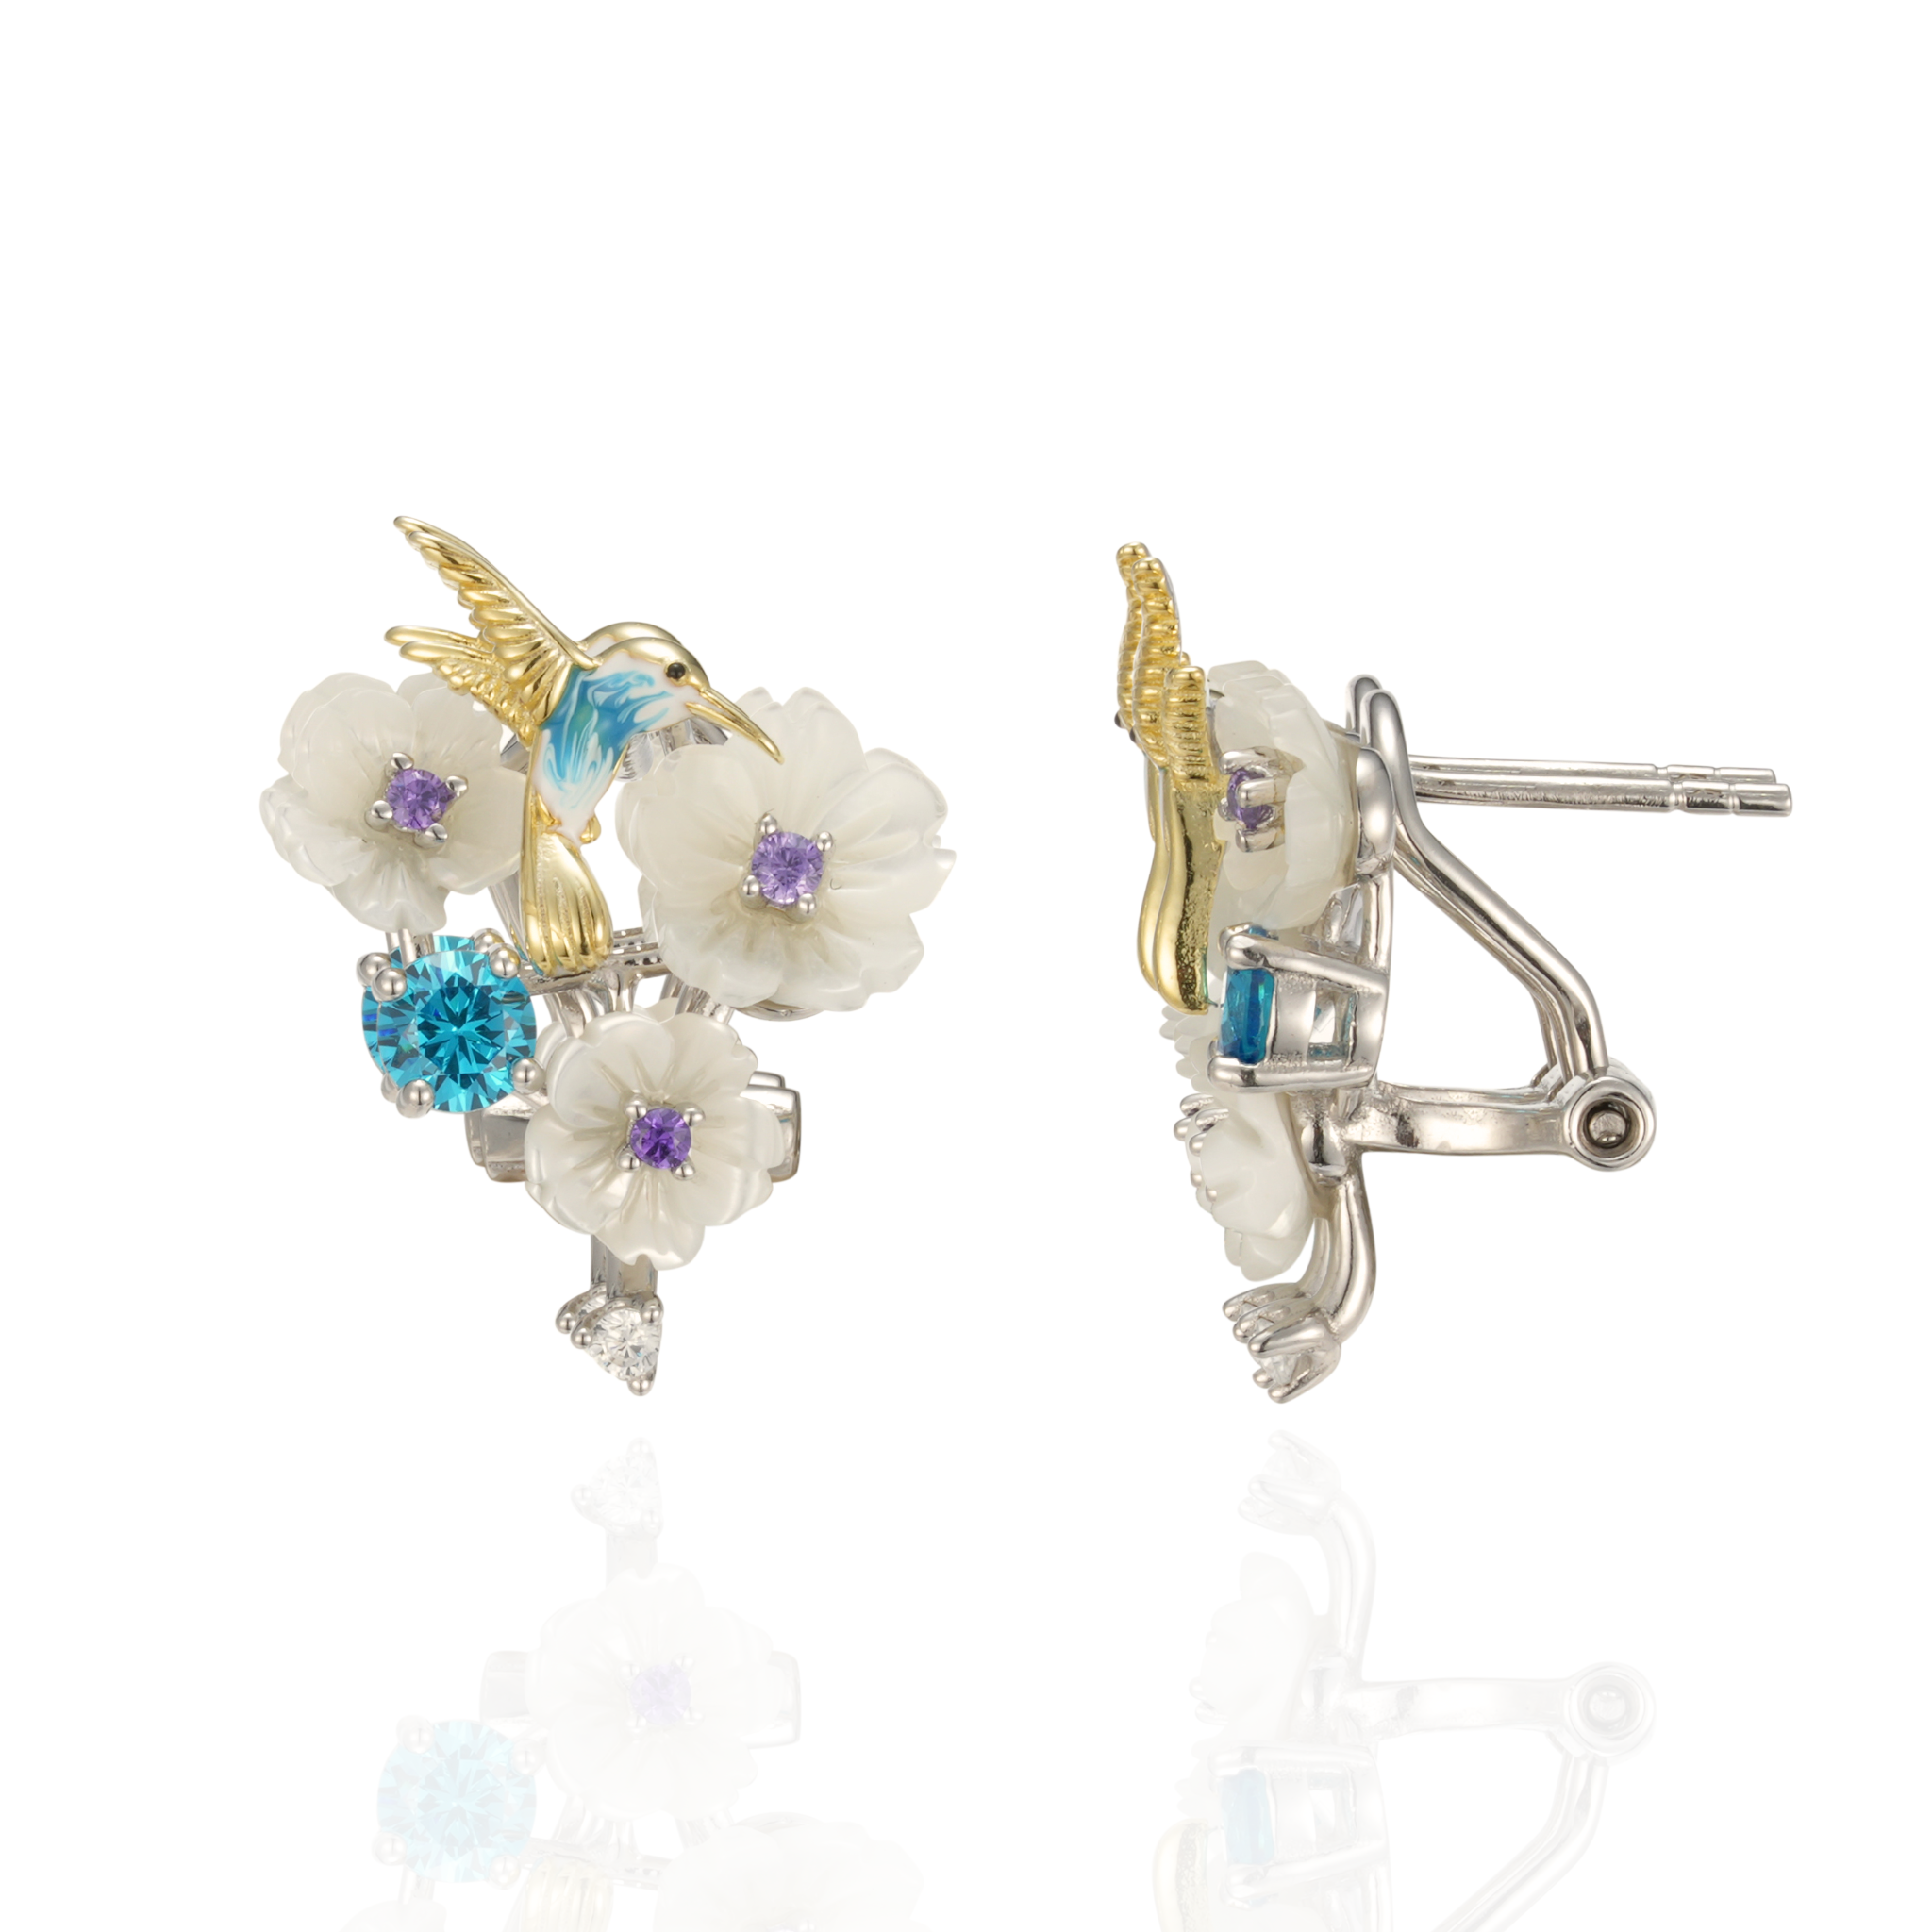 A pair of silver gold plated earrings with blue stones, enamel, shell flowers and a bird charm.